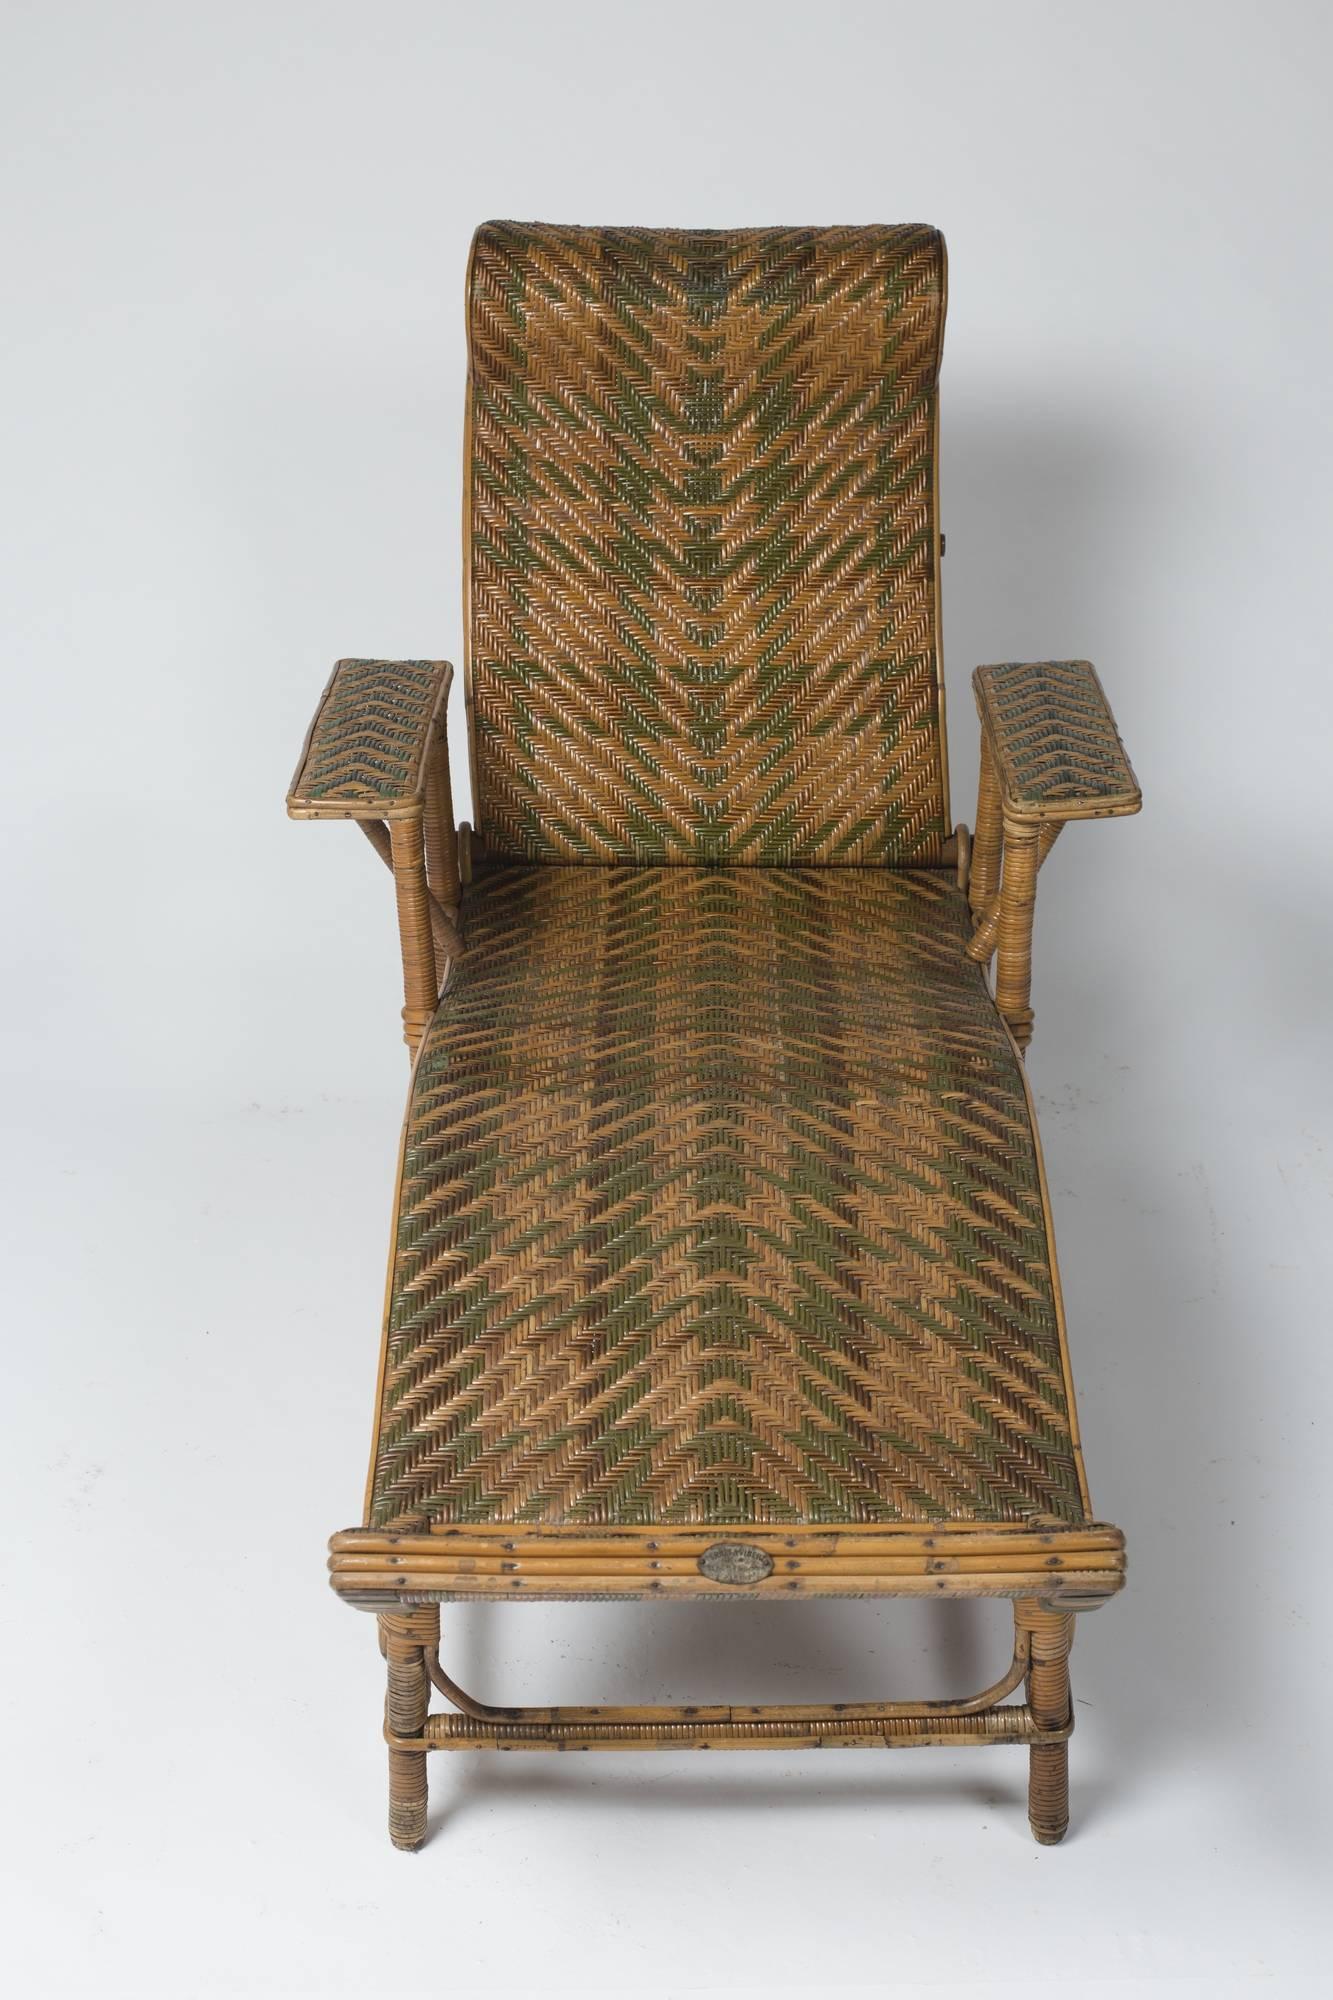 French Rattan Chaise Longue by Perret-Vibert, France, circa 1880